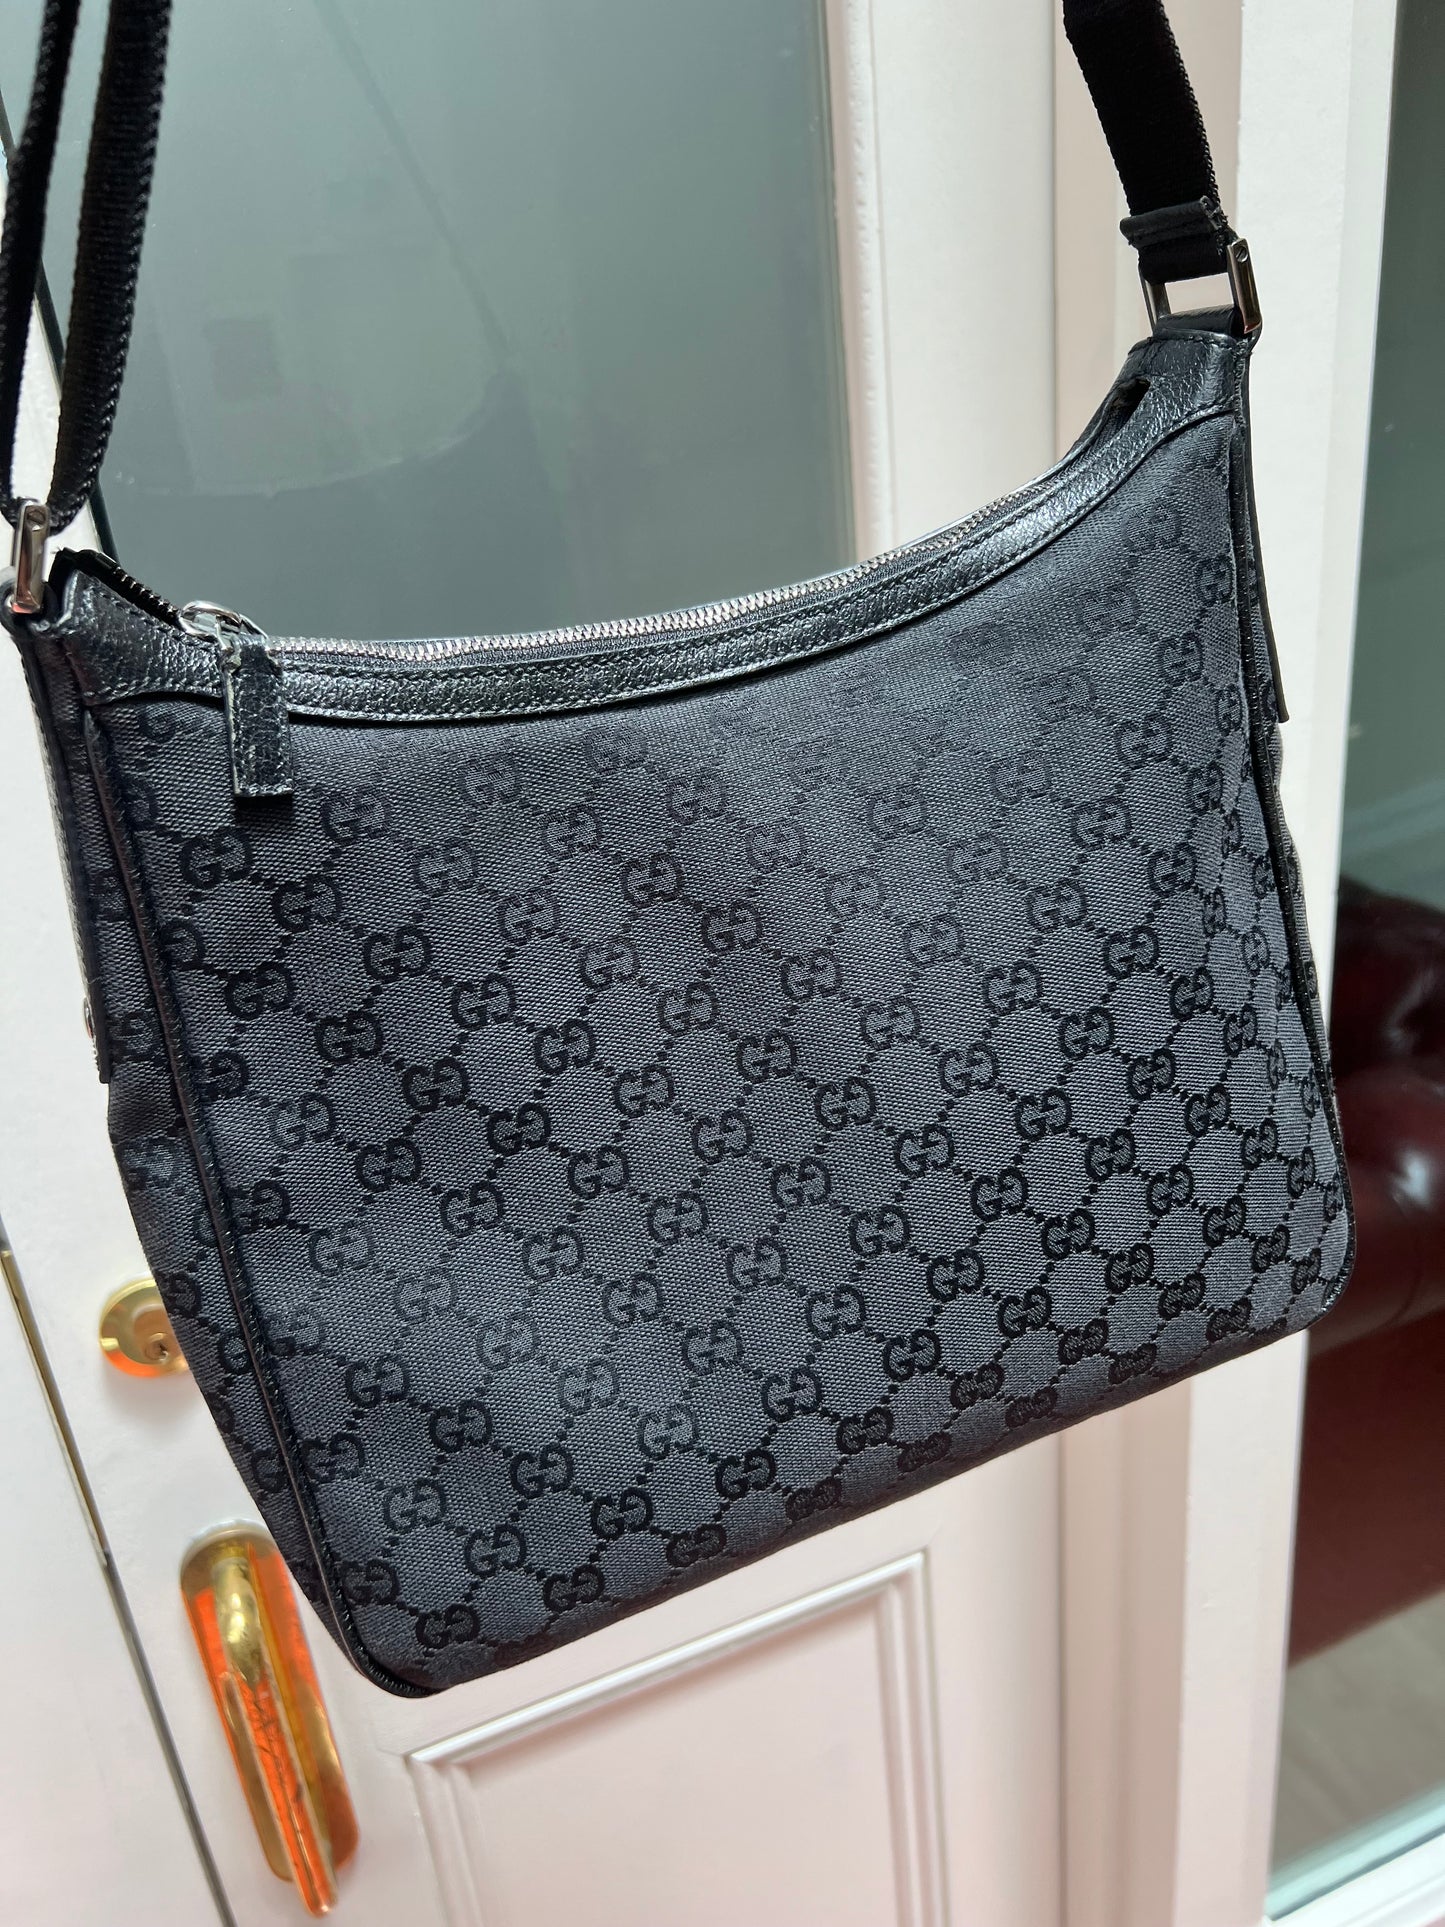 Pre-loved Gucci Black GG Canvas and Leather Crossbody Bag